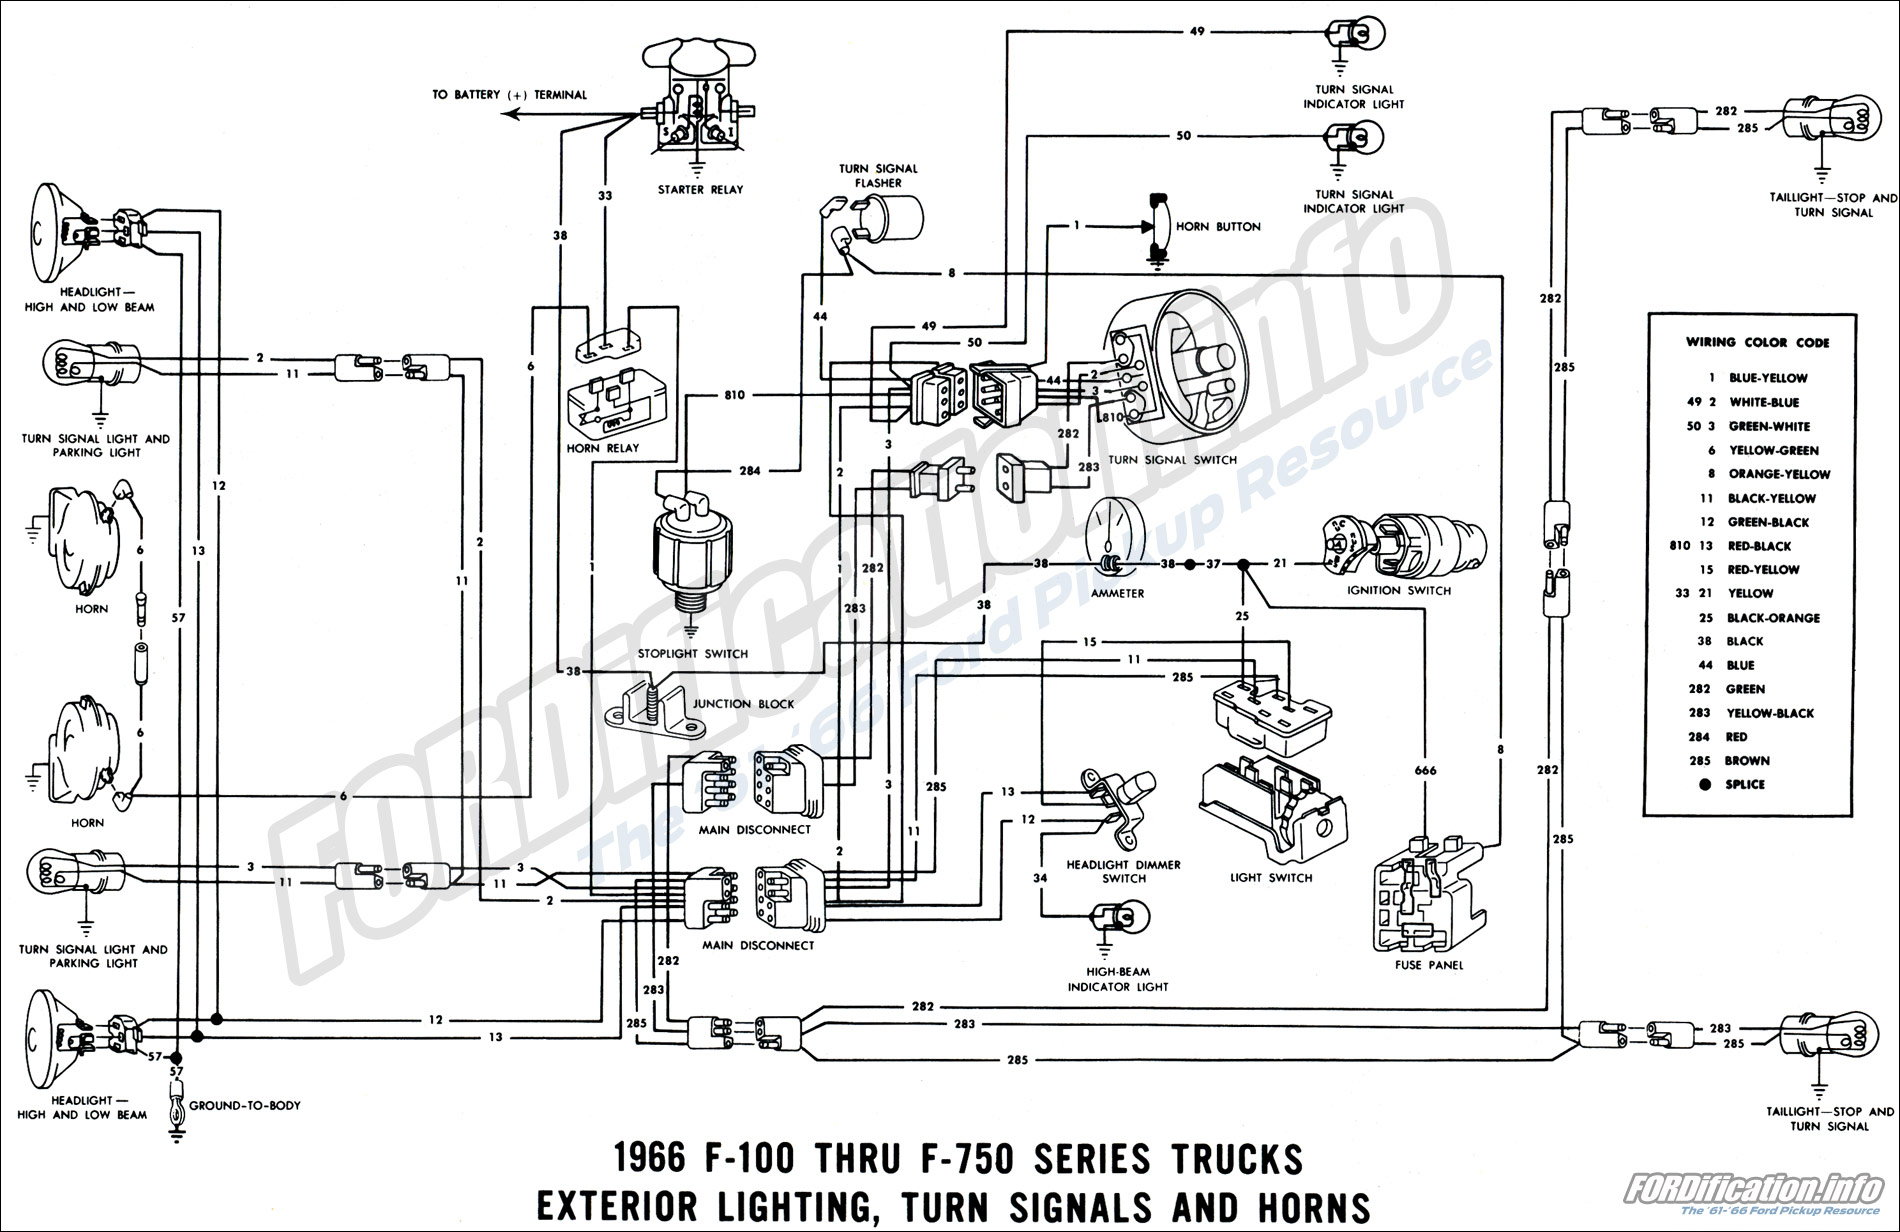 Tail light wiring - Ford Truck Enthusiasts Forums